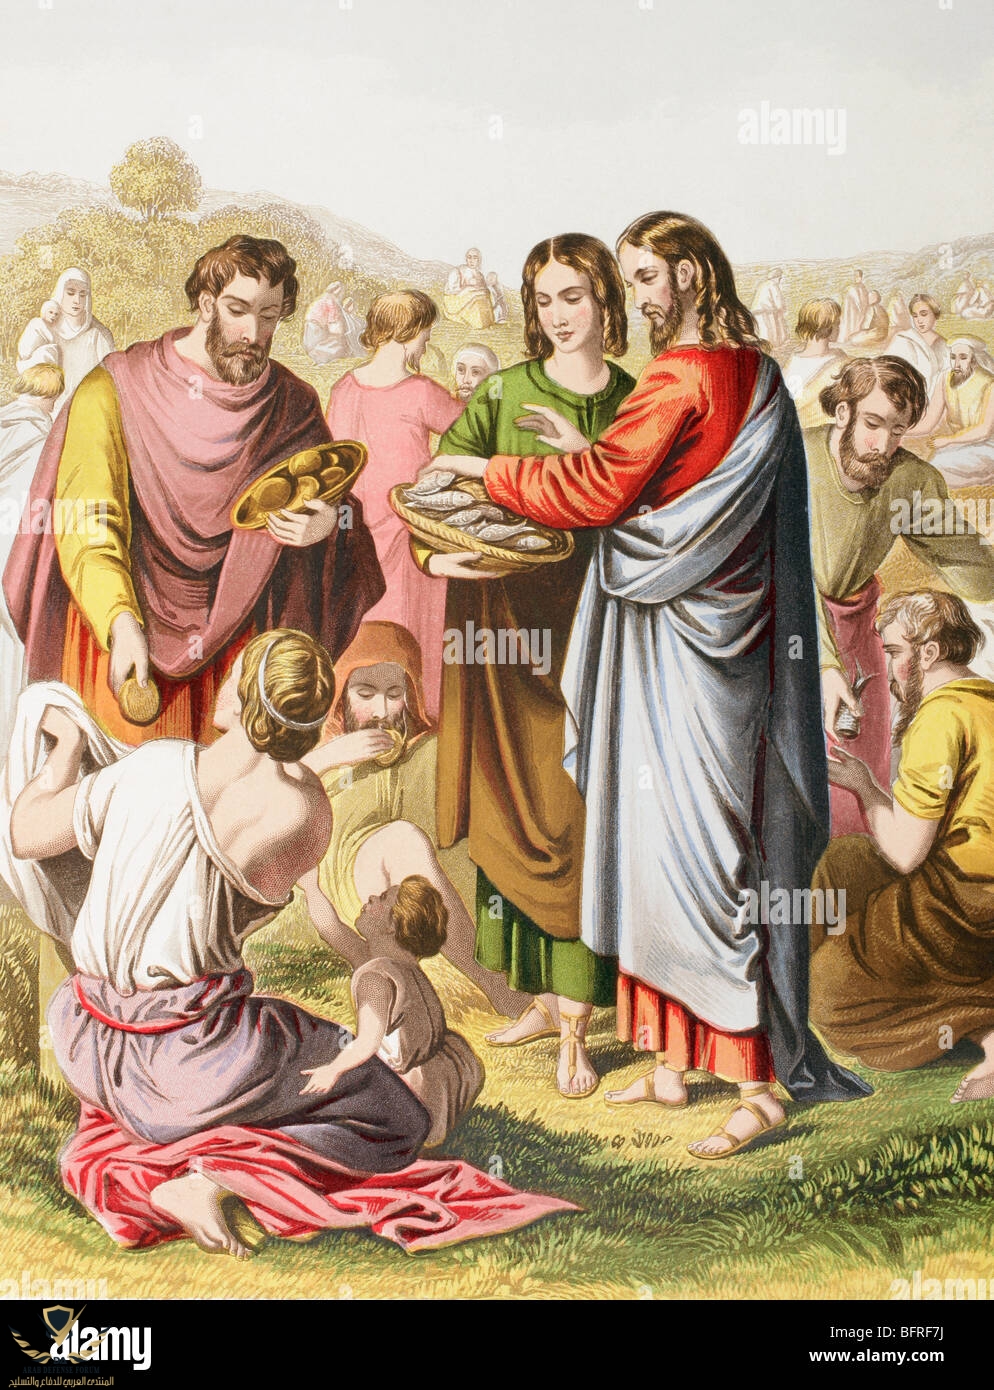 jesus-feeding-the-multitude-the-miracle-of-loaves-and-fishes-BFRF7J.jpg